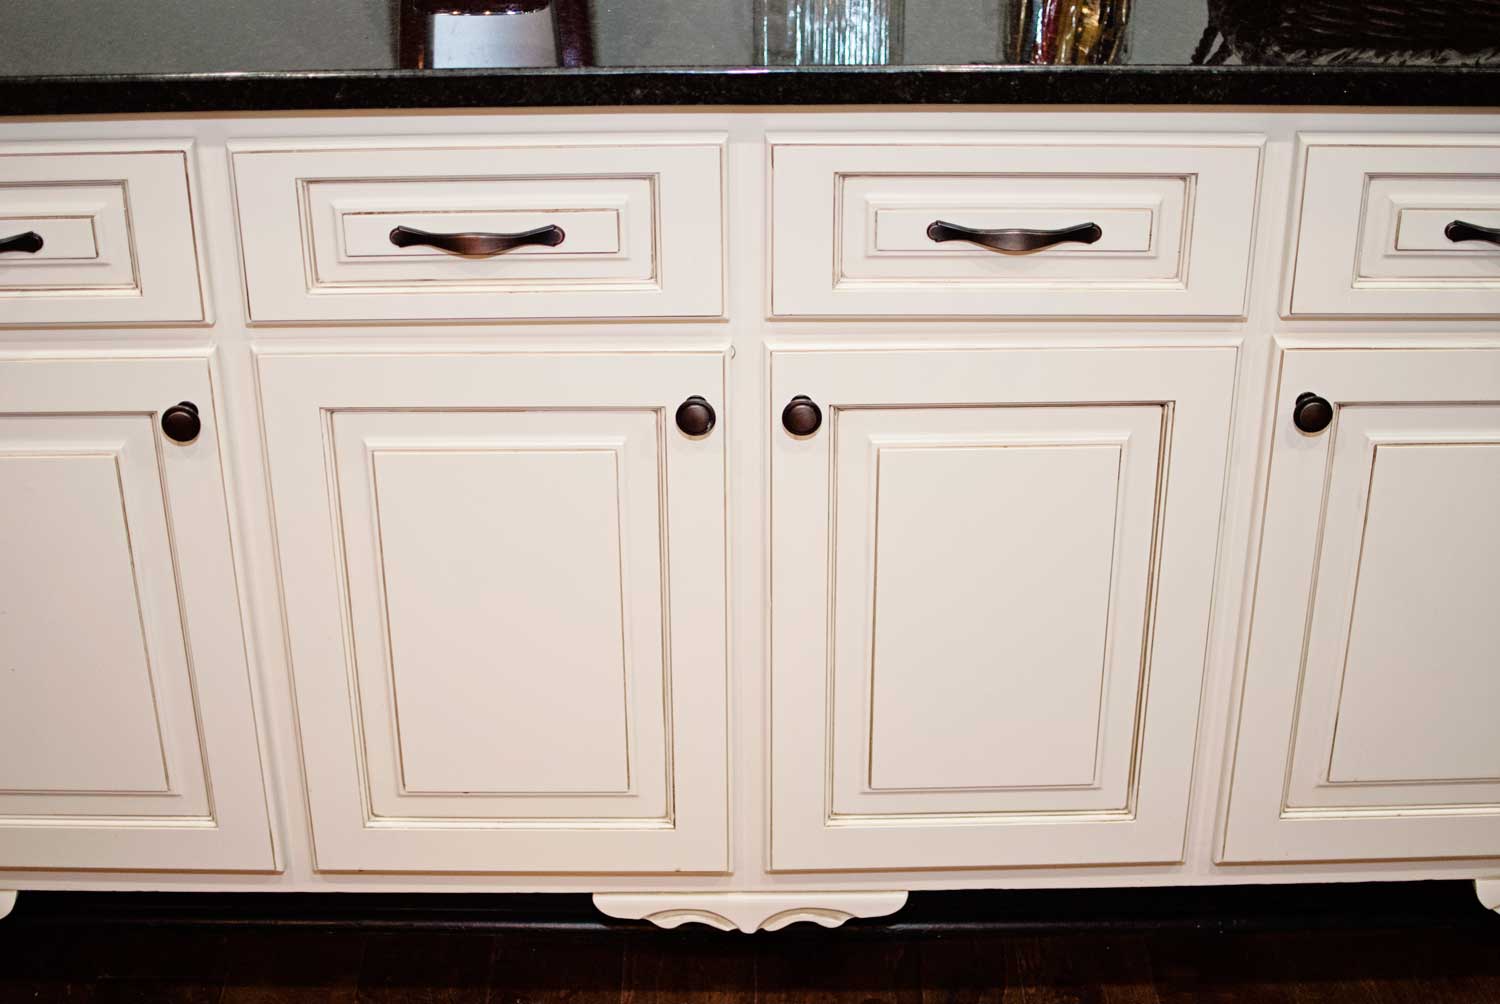 Refaced cabinet